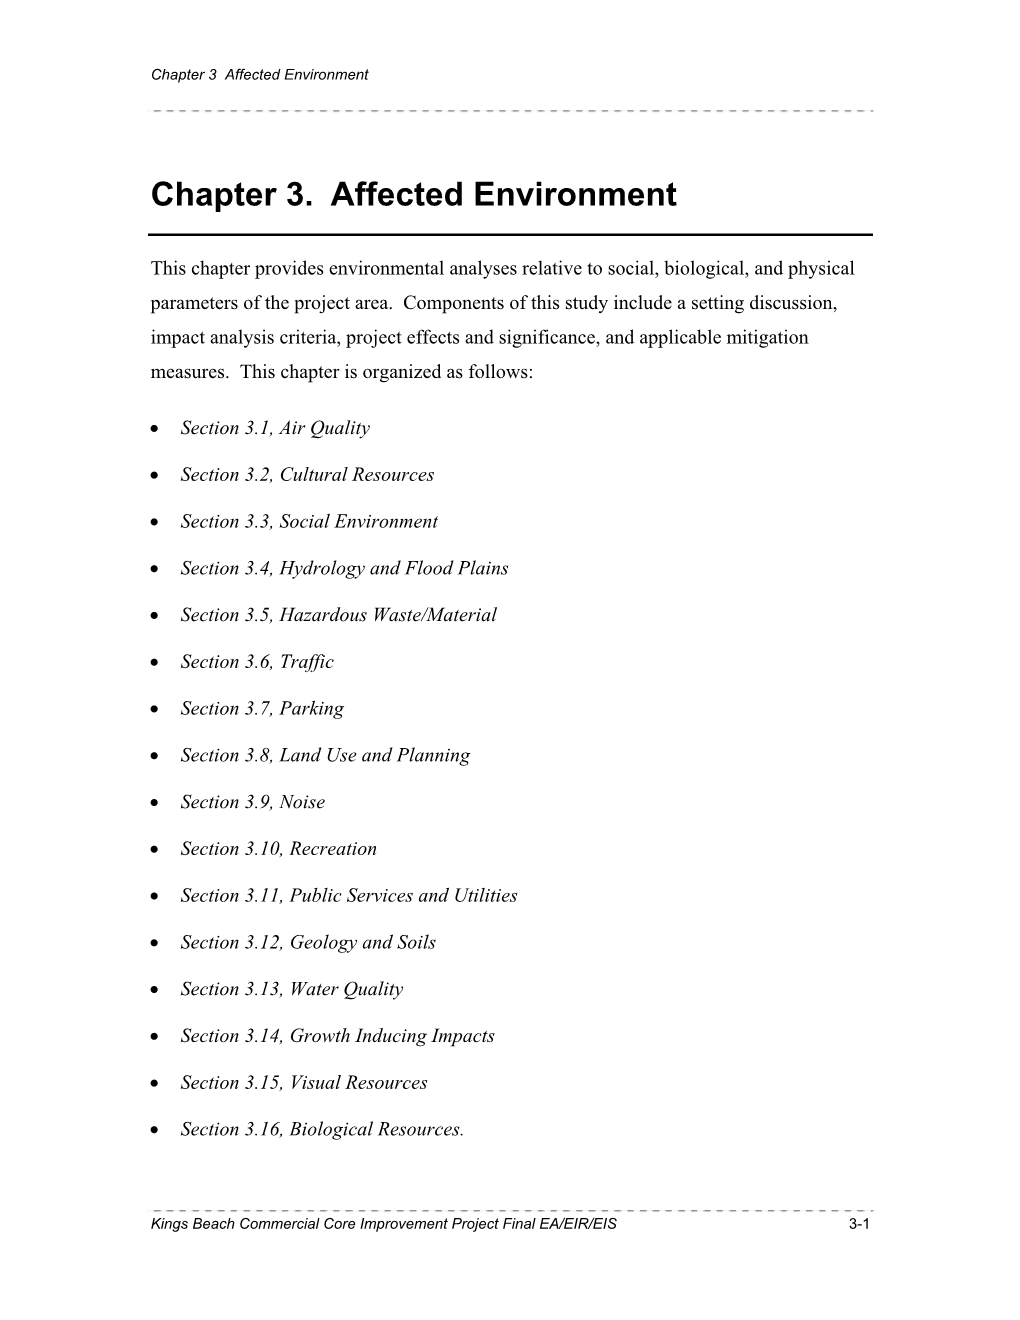 Chapter 3. Affected Environment